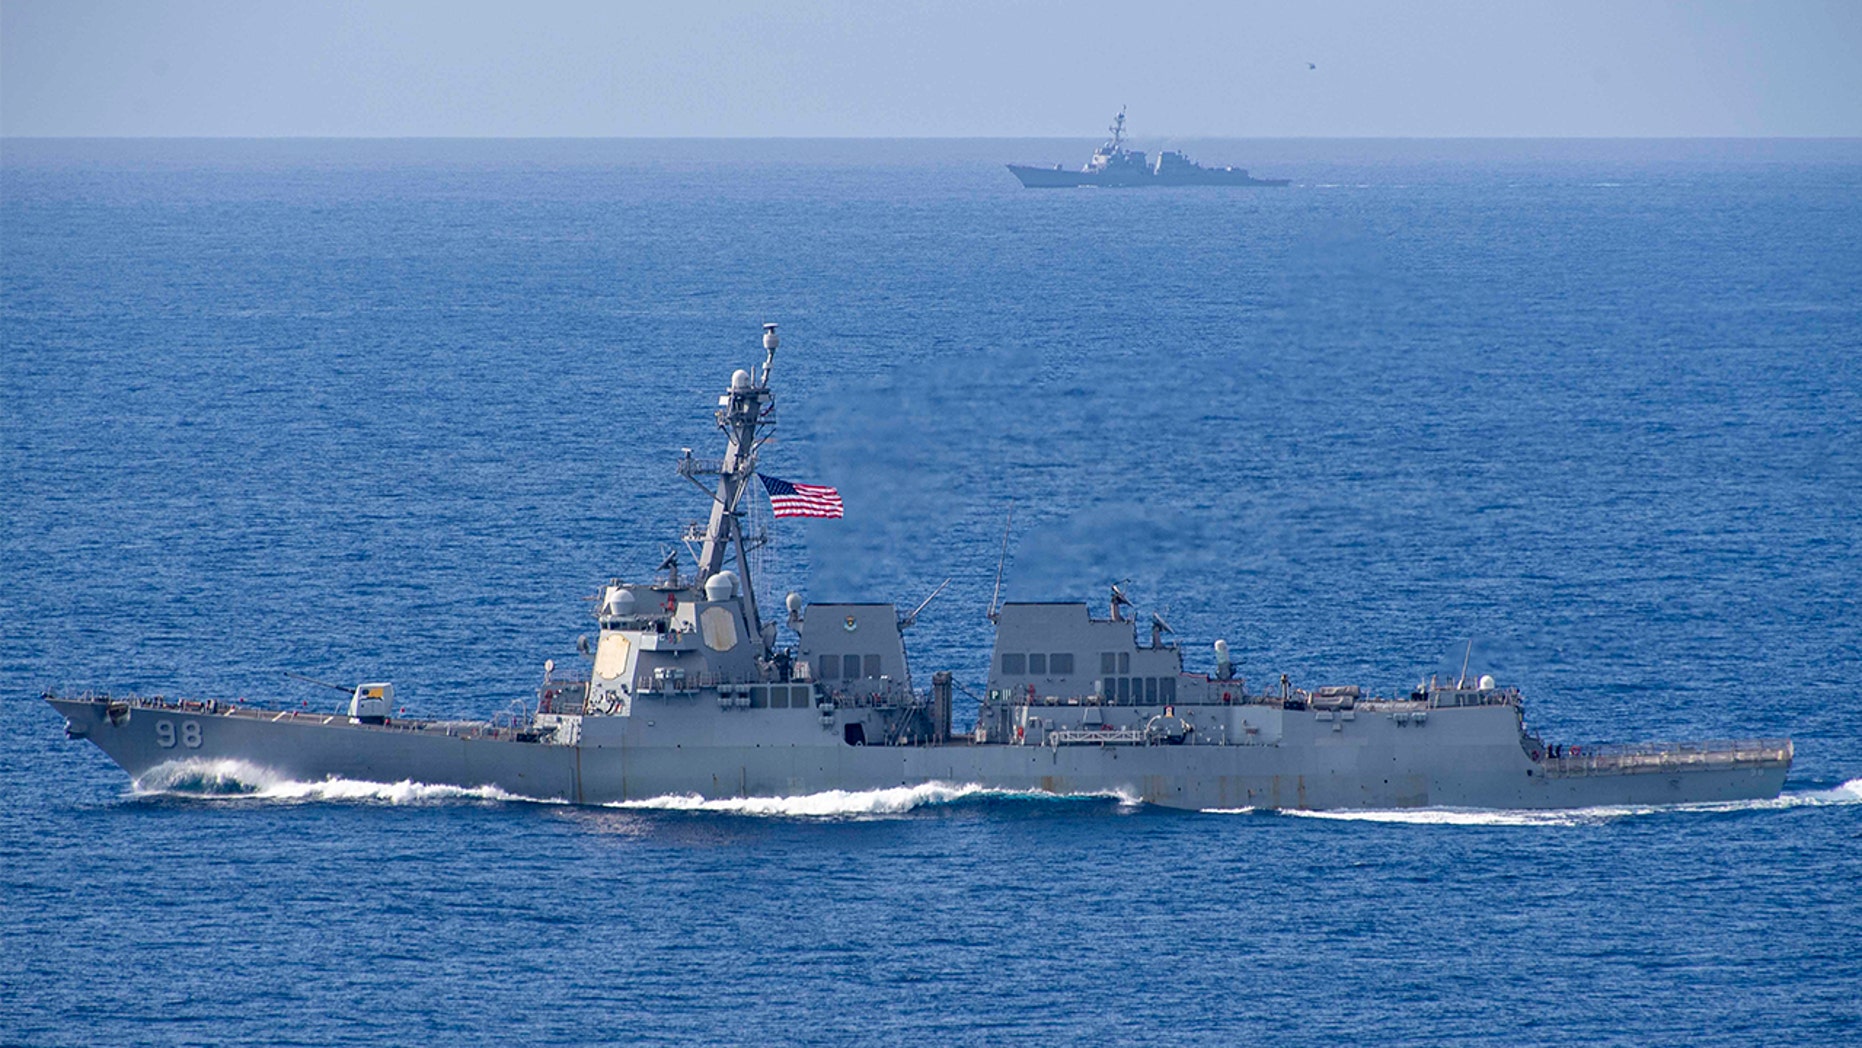 The Arleigh Burke-class guided-missile destroyers USS Forrest Sherman (DDG 98) and USS Farragut (DDG 99) transit the Atlantic Ocean - file photo.